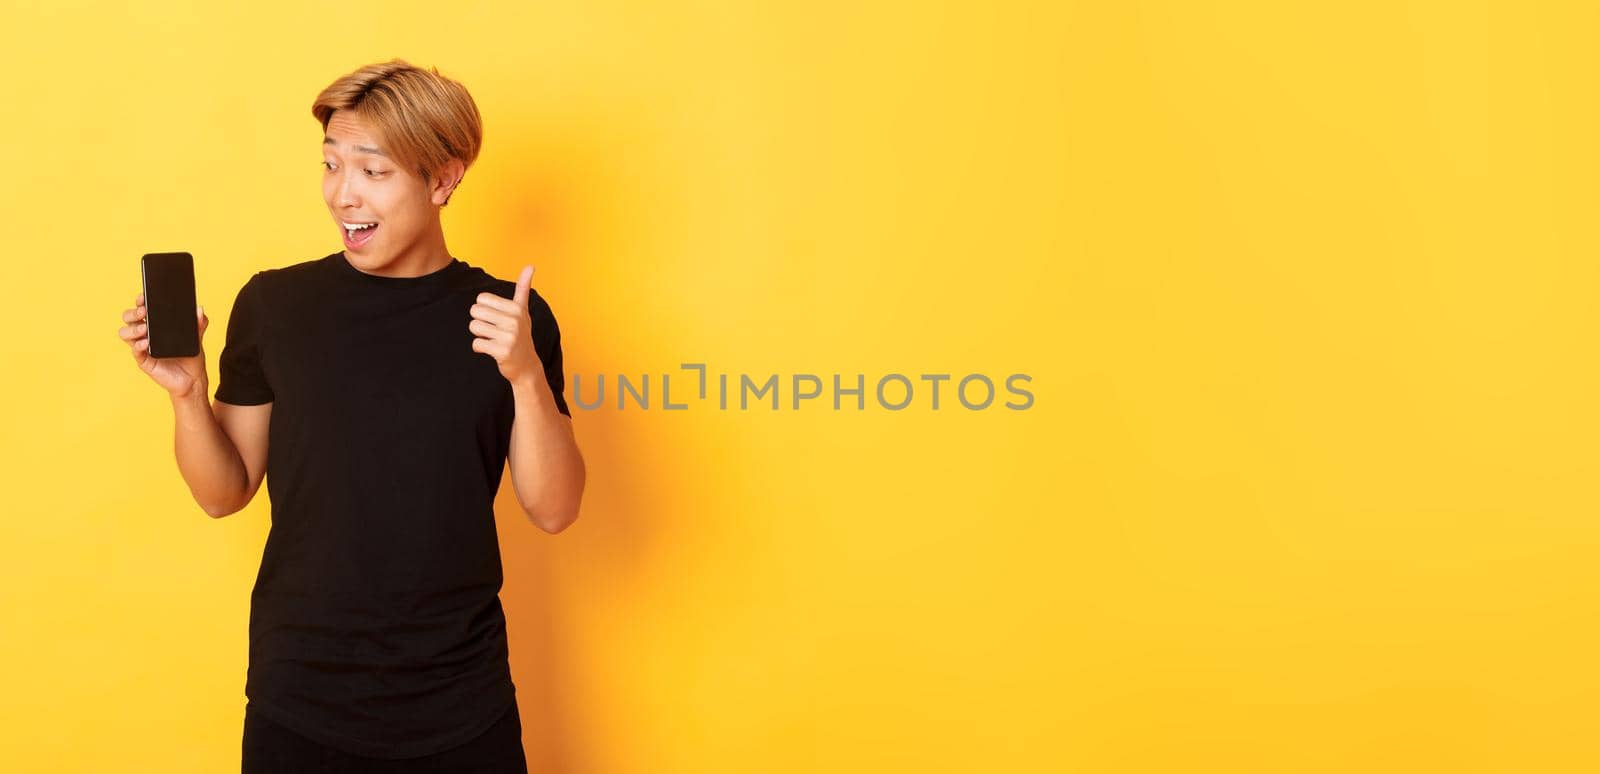 Portrait of satisfied asian guy looking at smartphone screen and showing thumbs-up in approval, standing yellow background.